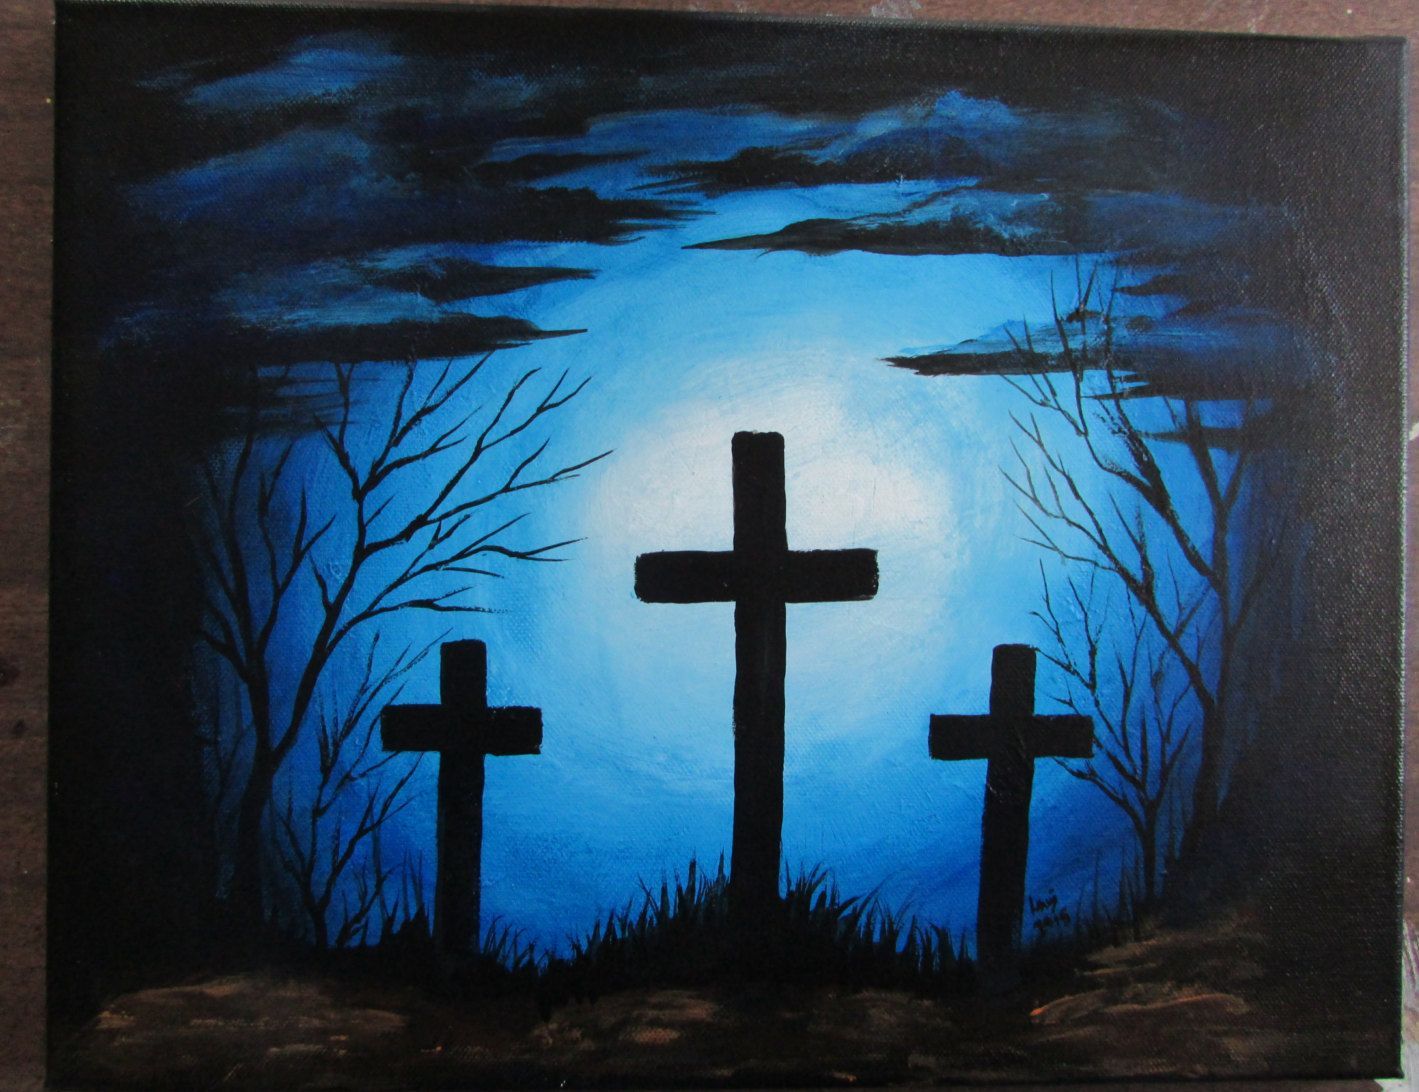 Holy Crosses Blue Background Painting 11 x 14 Acrylic on Stretched Canvas - Holy Crosses Blue Background Painting 11 x 14 Acrylic on Stretched Canvas -   17 beauty Background painting ideas